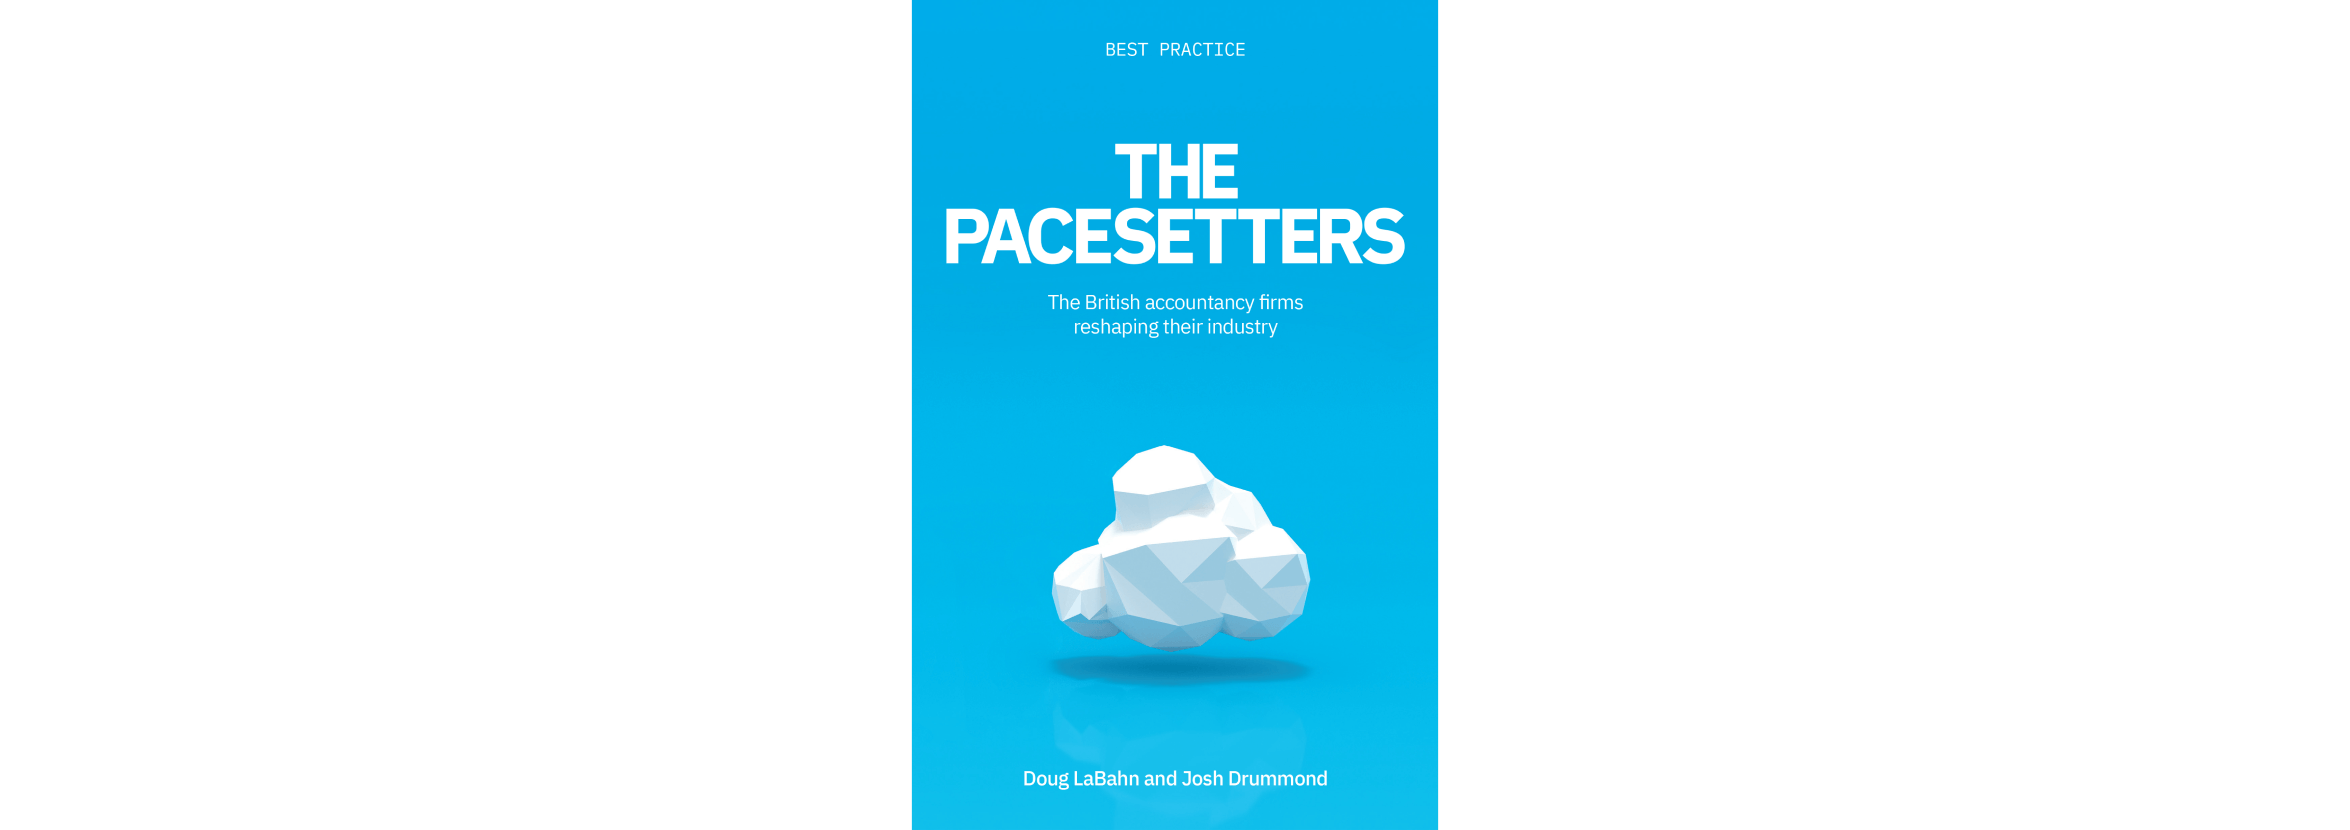 The cover of The Pacesetters, featuring a stylised white cloud on a blue background.